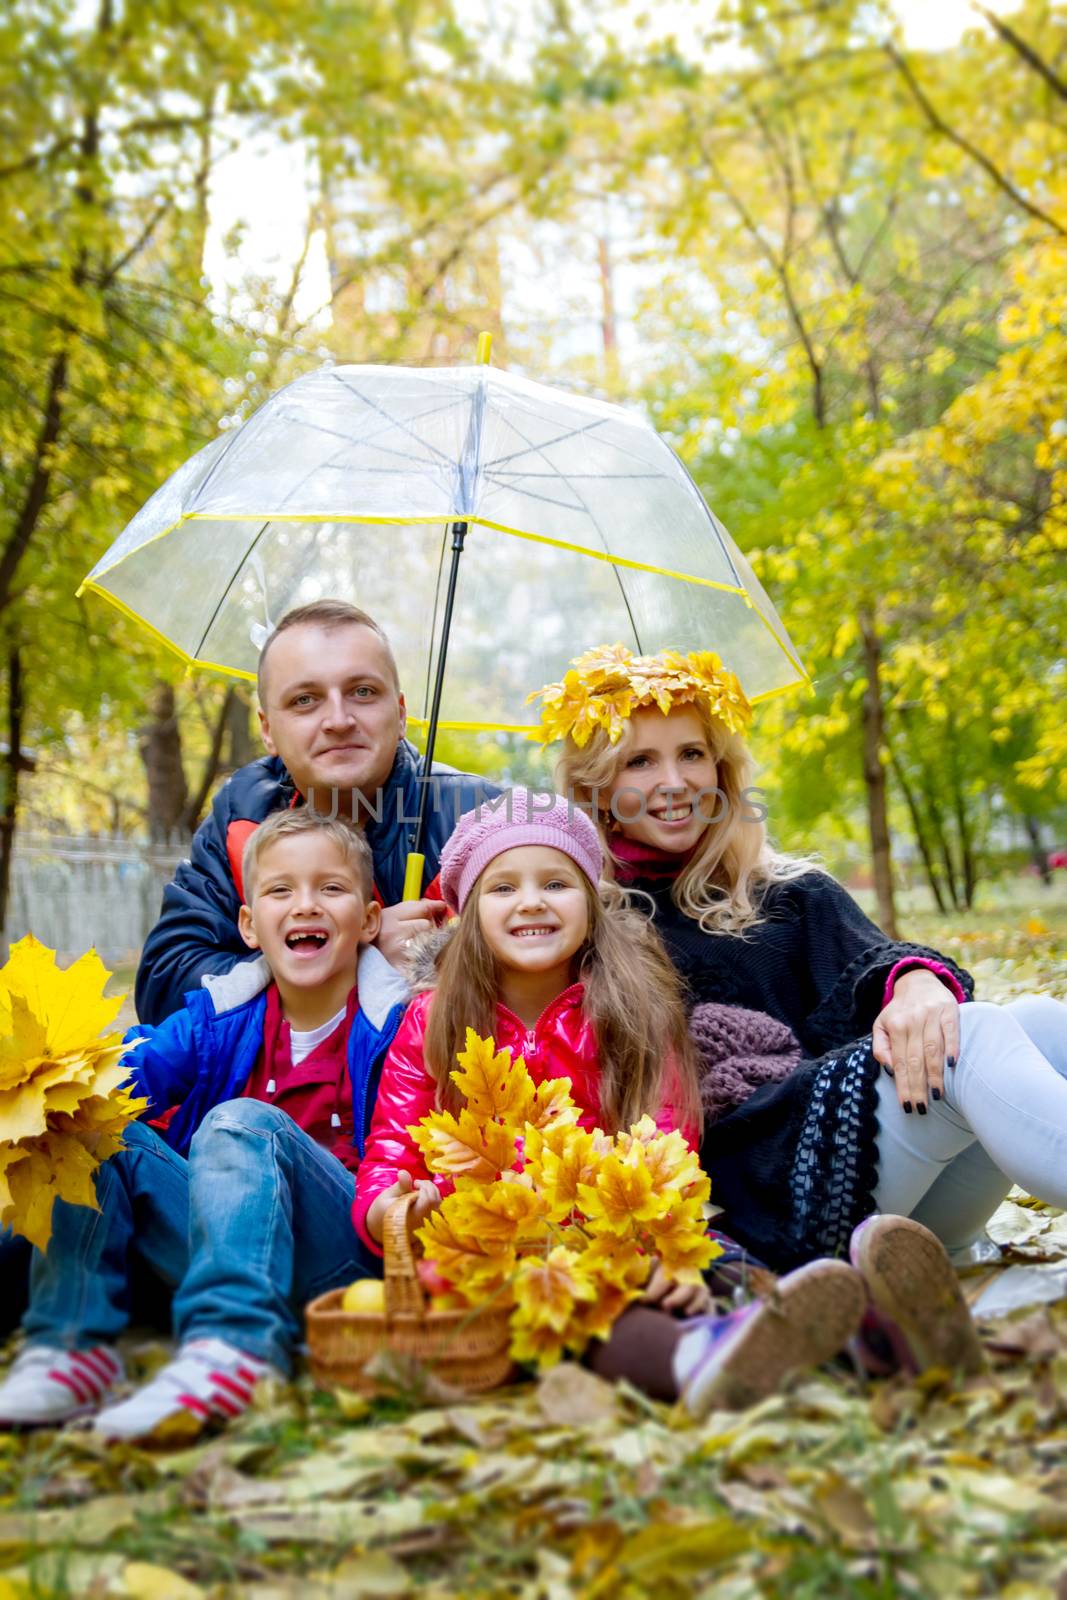 Family of four under umbrella in autumn by Angel_a